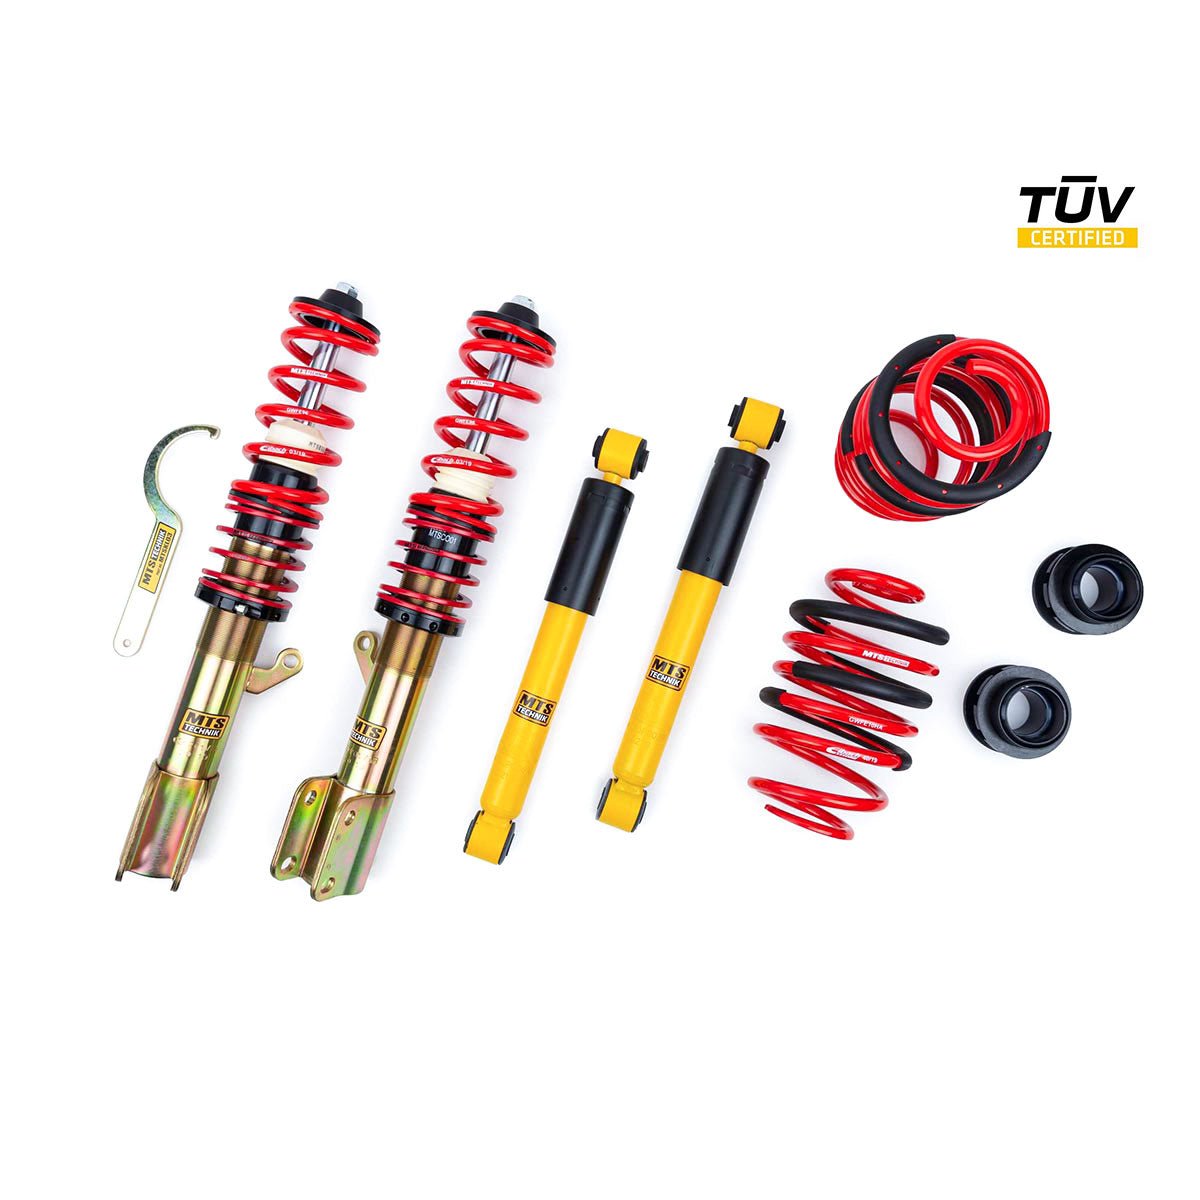 MTS TECHNIK coilover kit STREET Opel Astra G Limousine (with TÜV) - PARTS33 GmbH